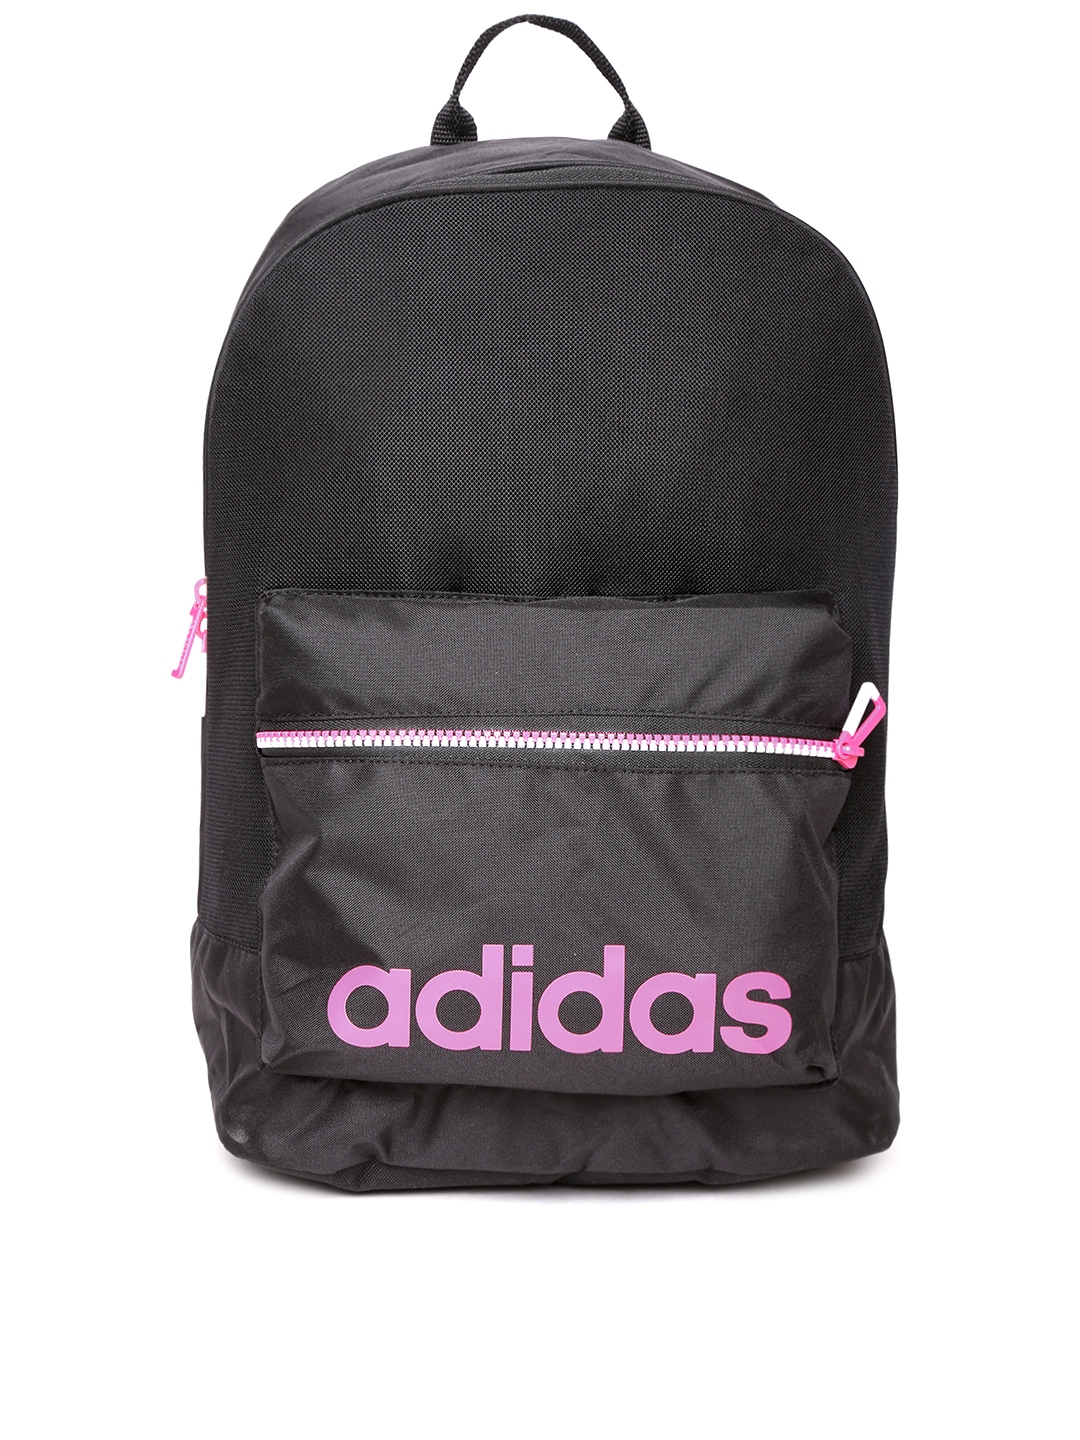 ADIDAS NEO Black G Daily Solid Backpack - Backpacks for Women 1913270 | Myntra